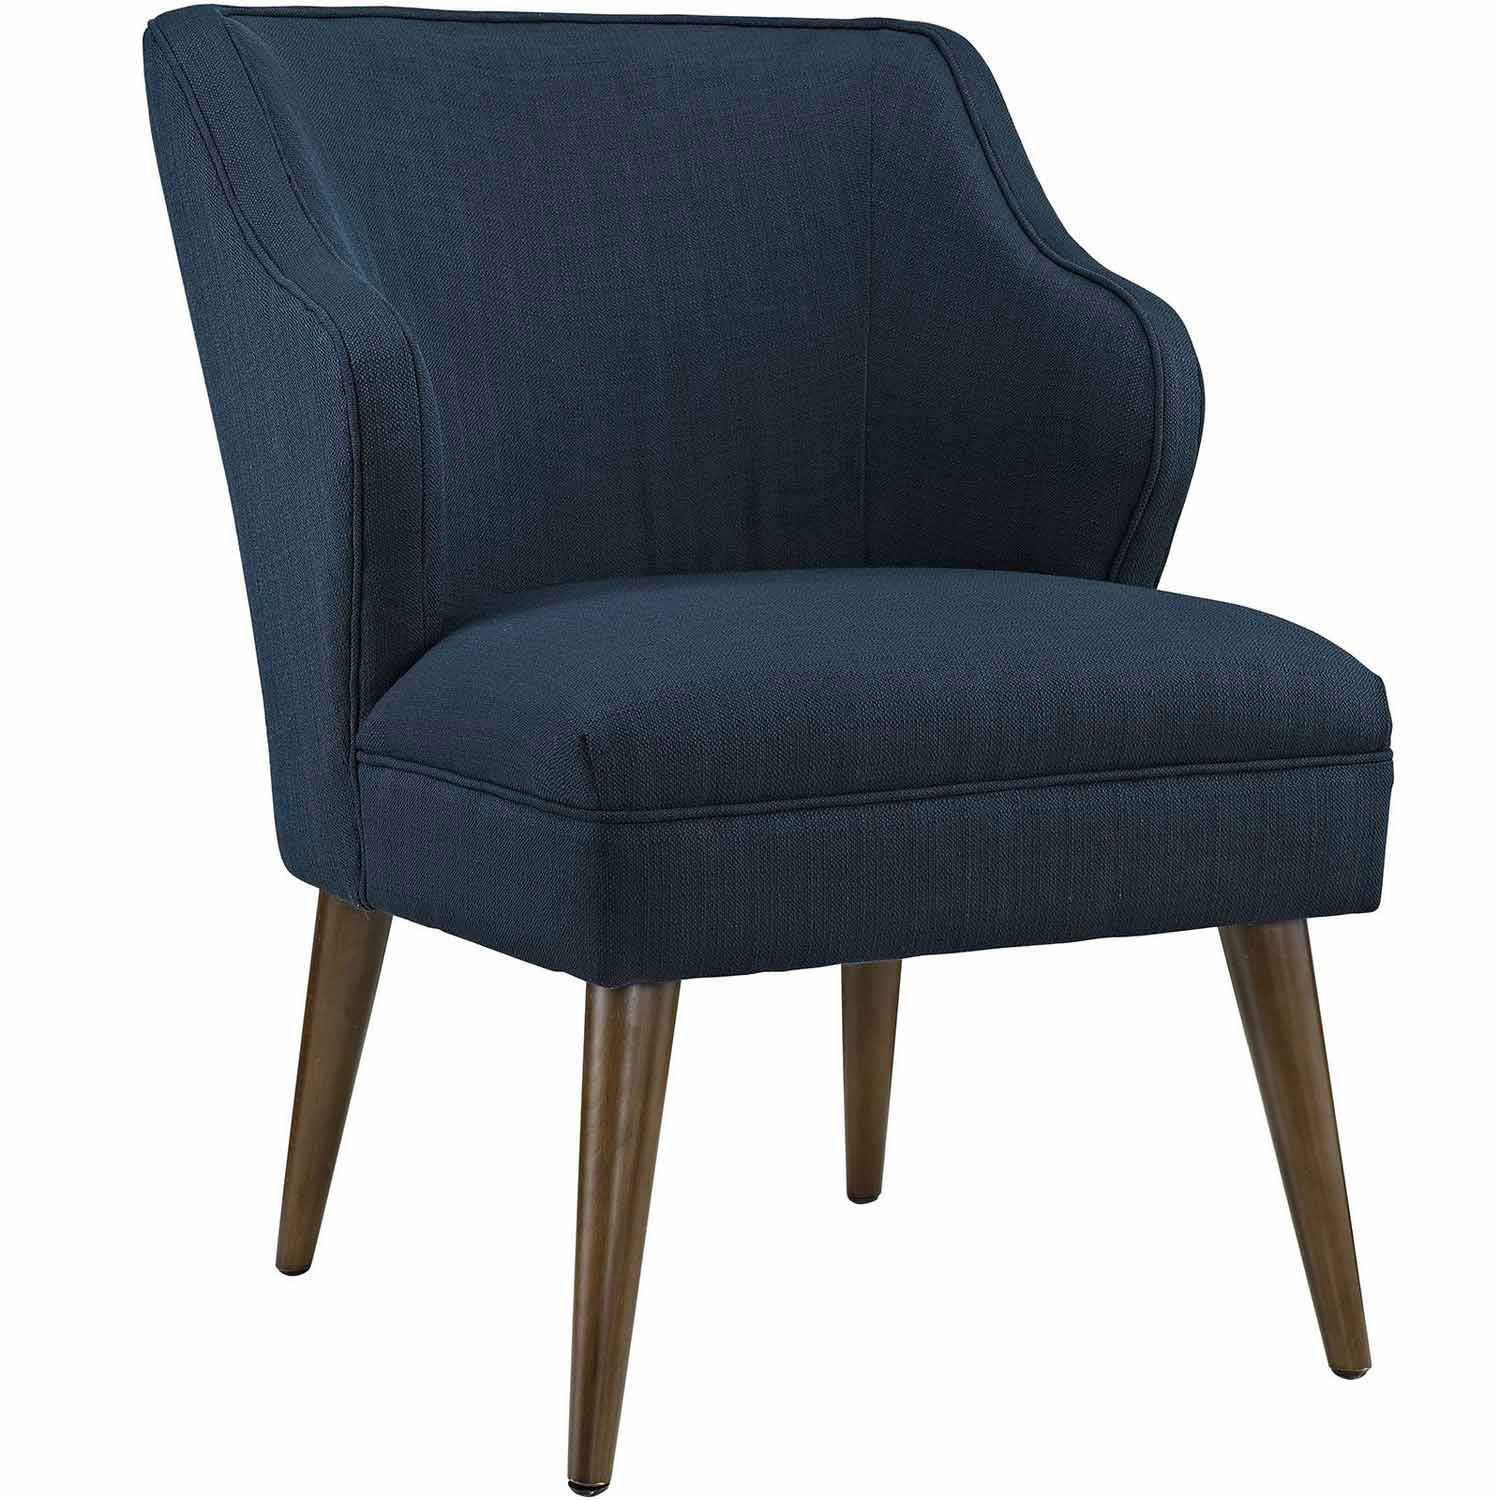 Modway Swell Fabric Arm Chair - Azure